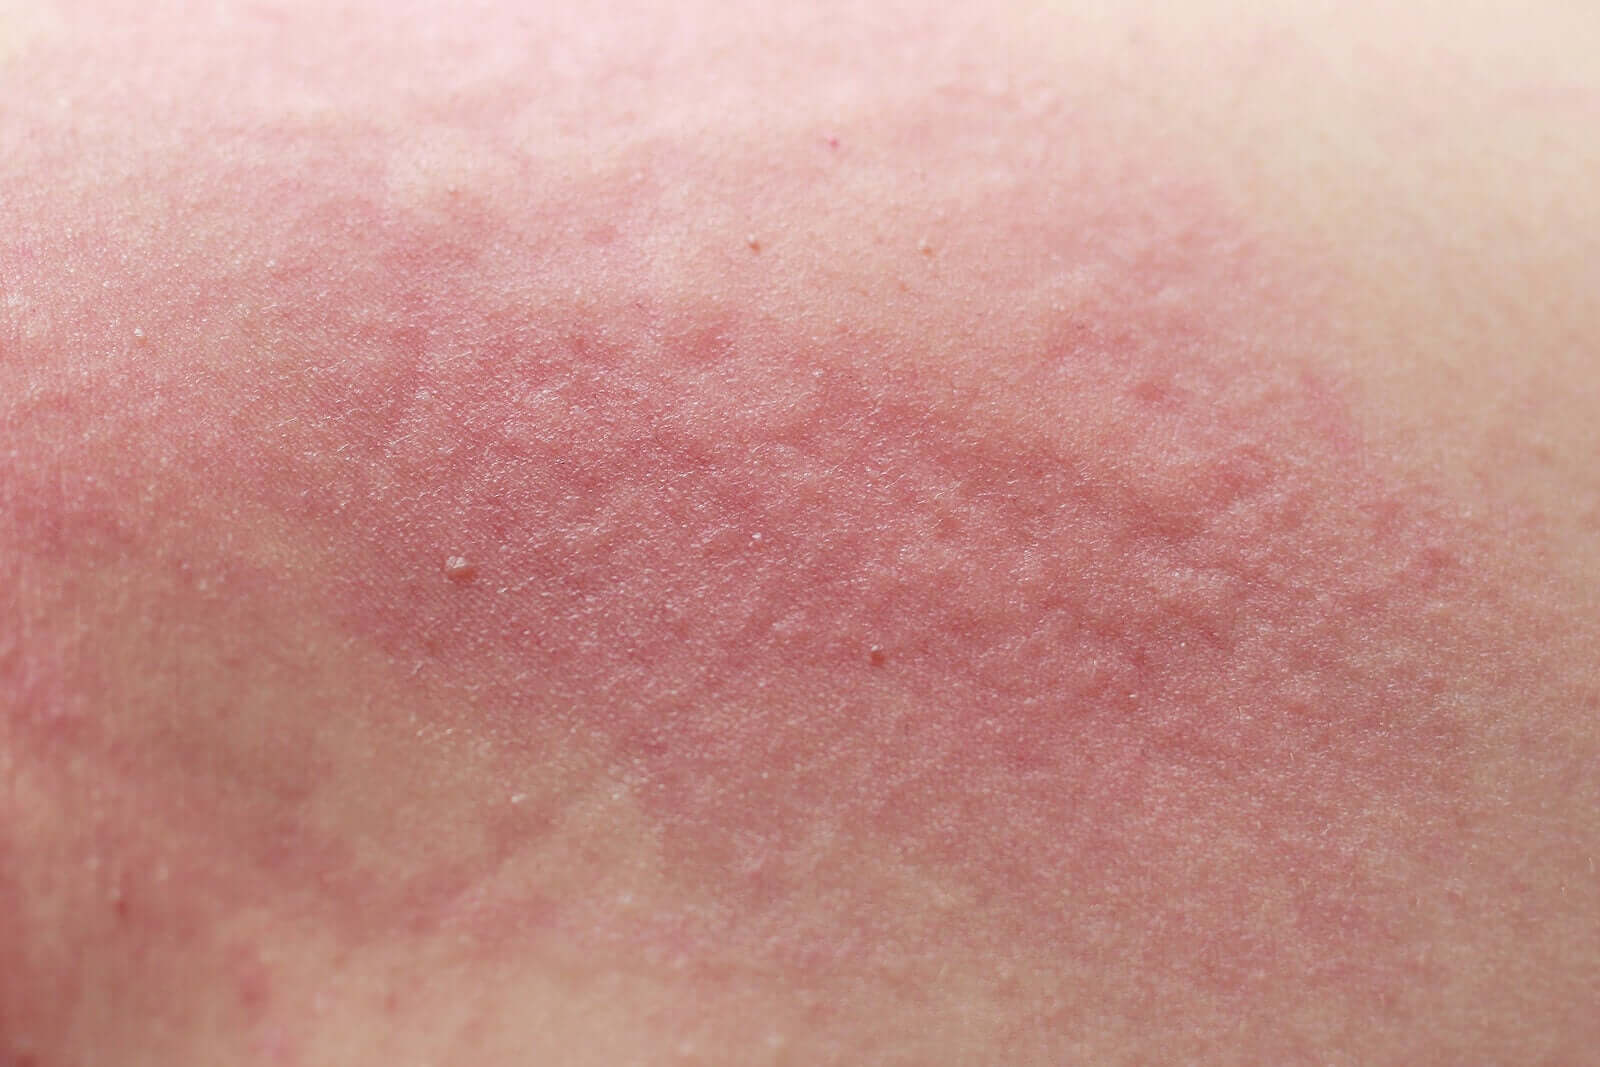 Scabies in Children: Symptoms, Causes and Treatment